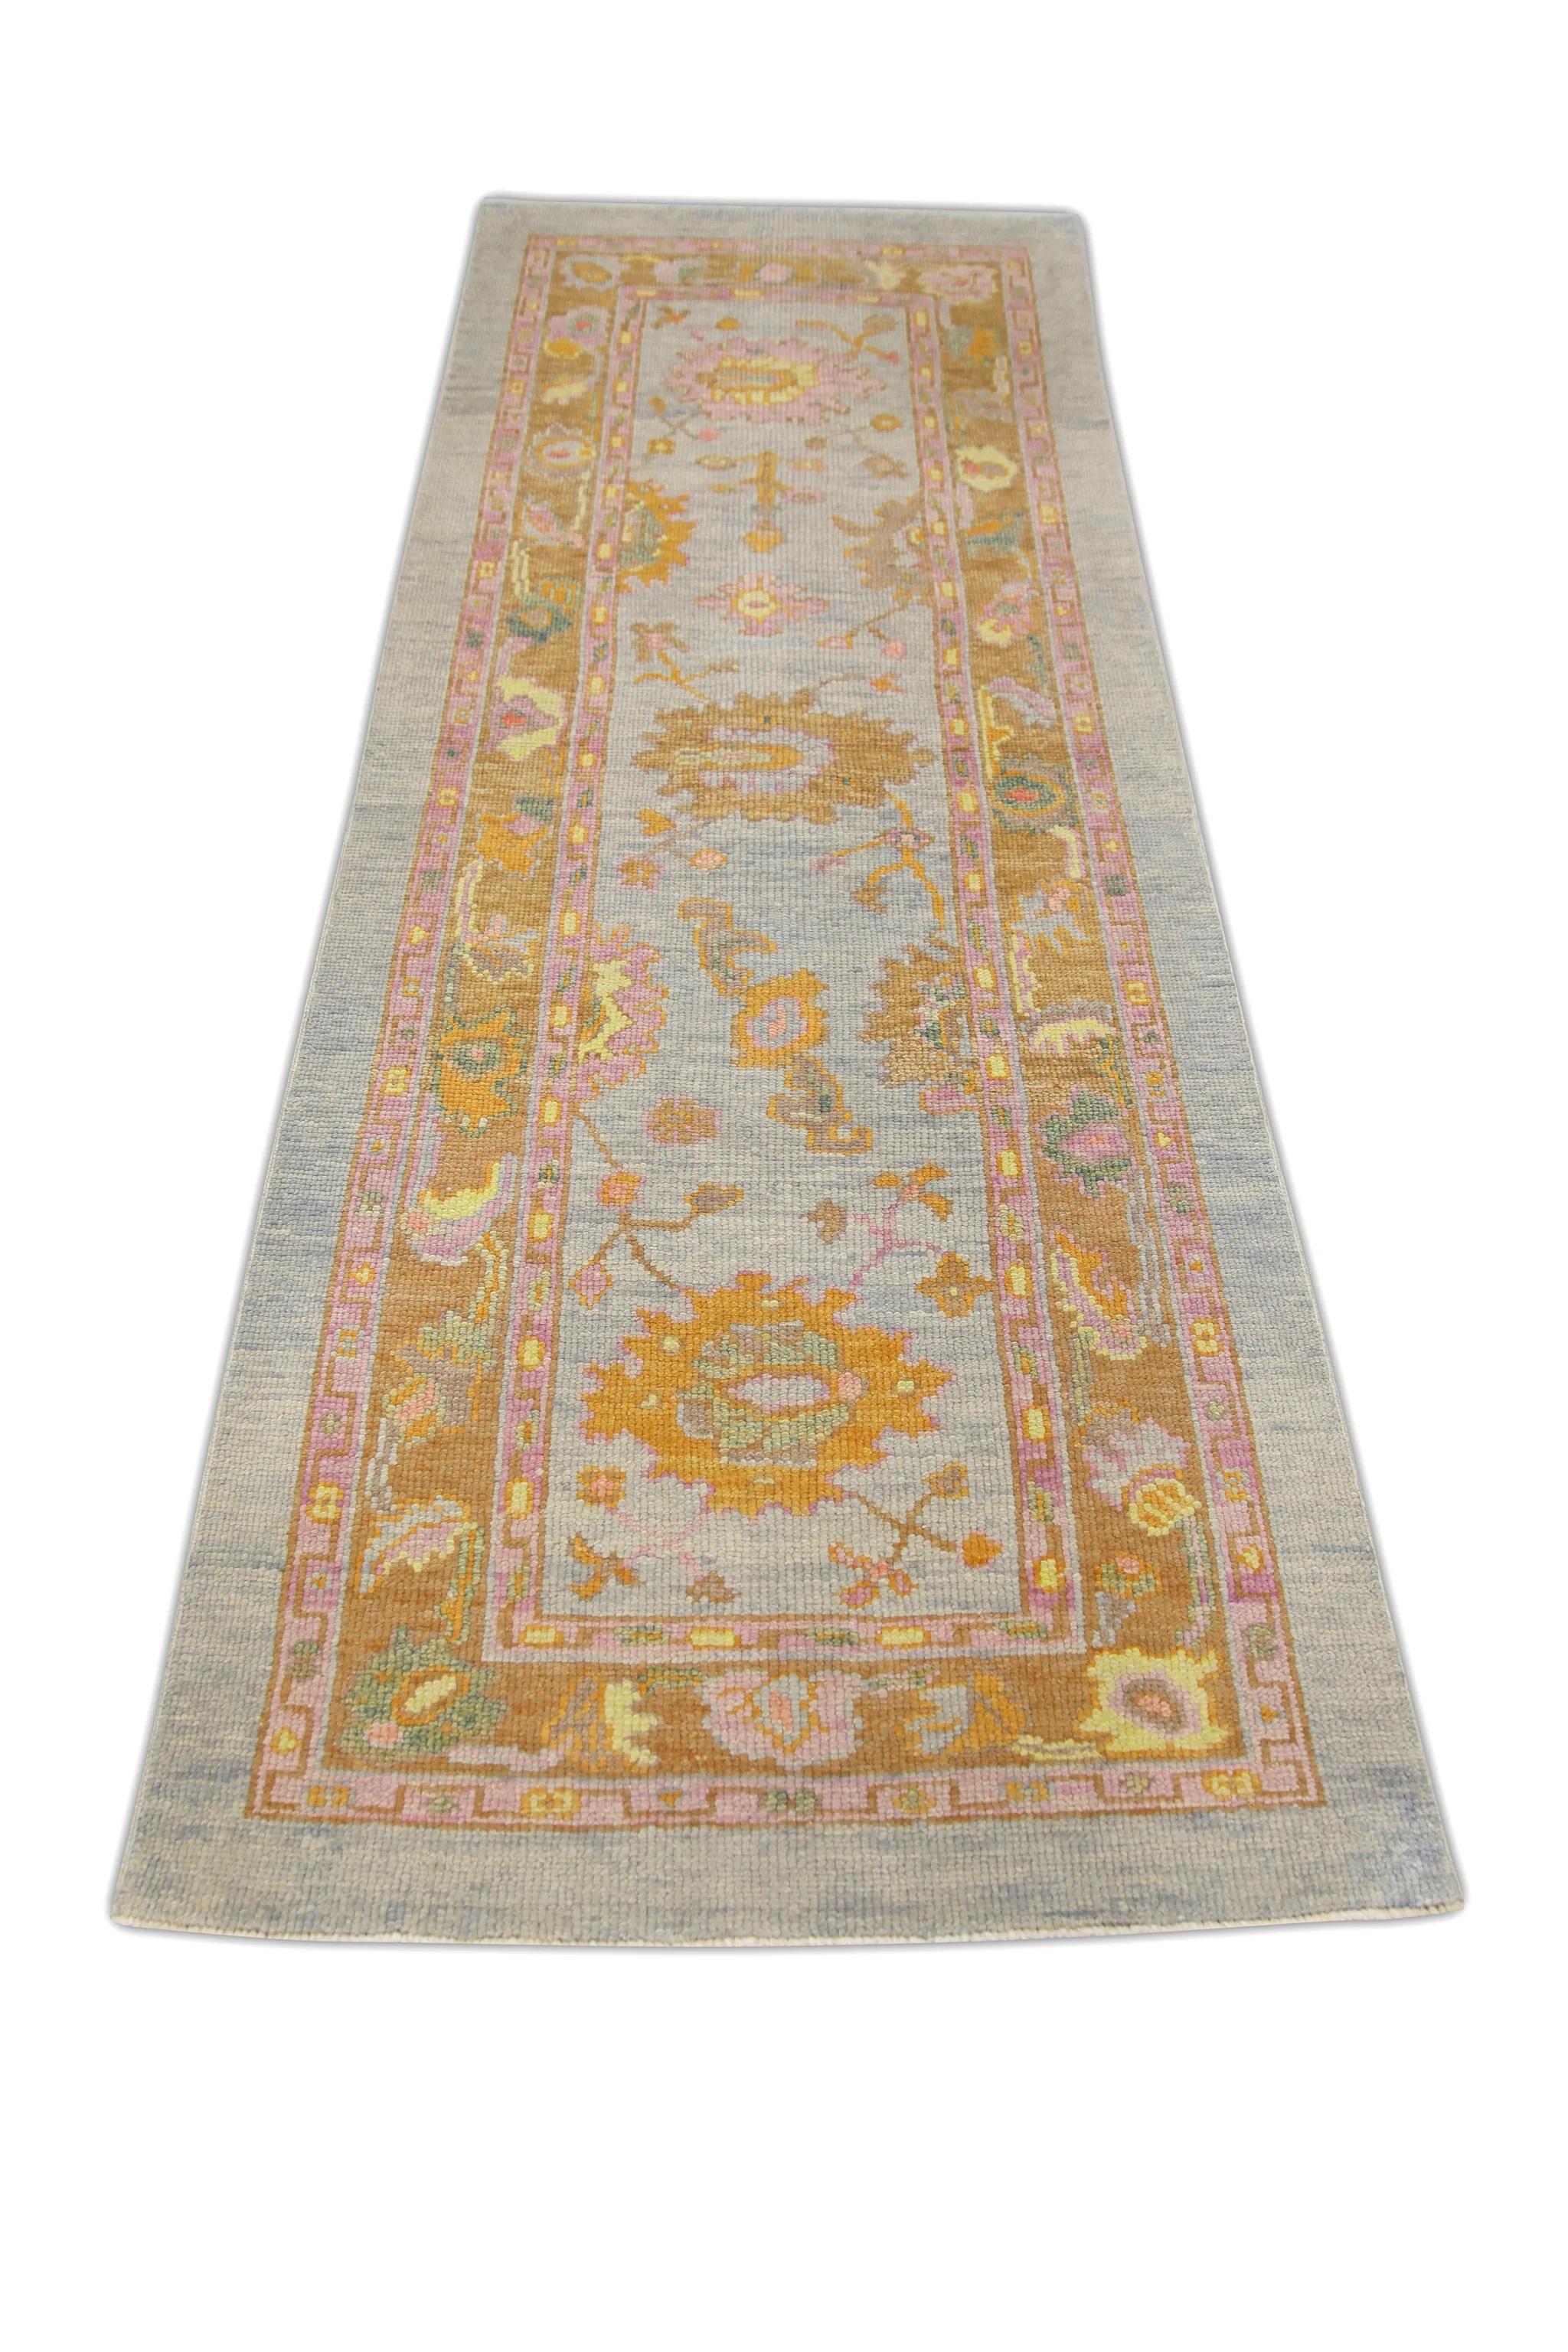 Contemporary Floral Design Handwoven Wool Turkish Oushak Rug in Blue and Pink 3' x 8'4